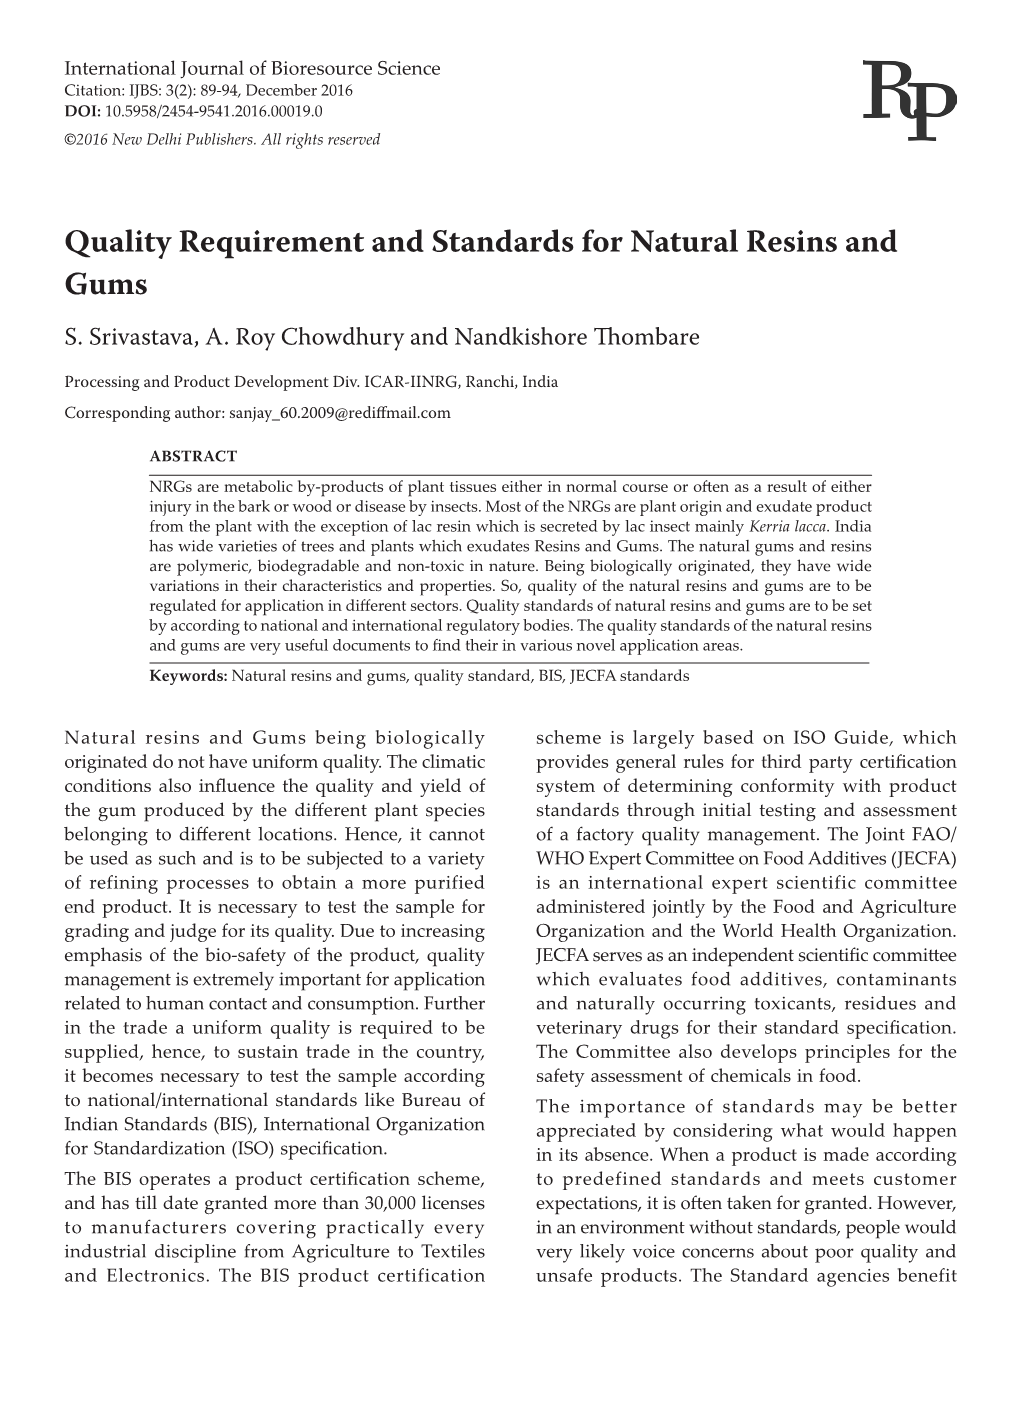 Quality Requirement and Standards for Natural Resins and Gums S